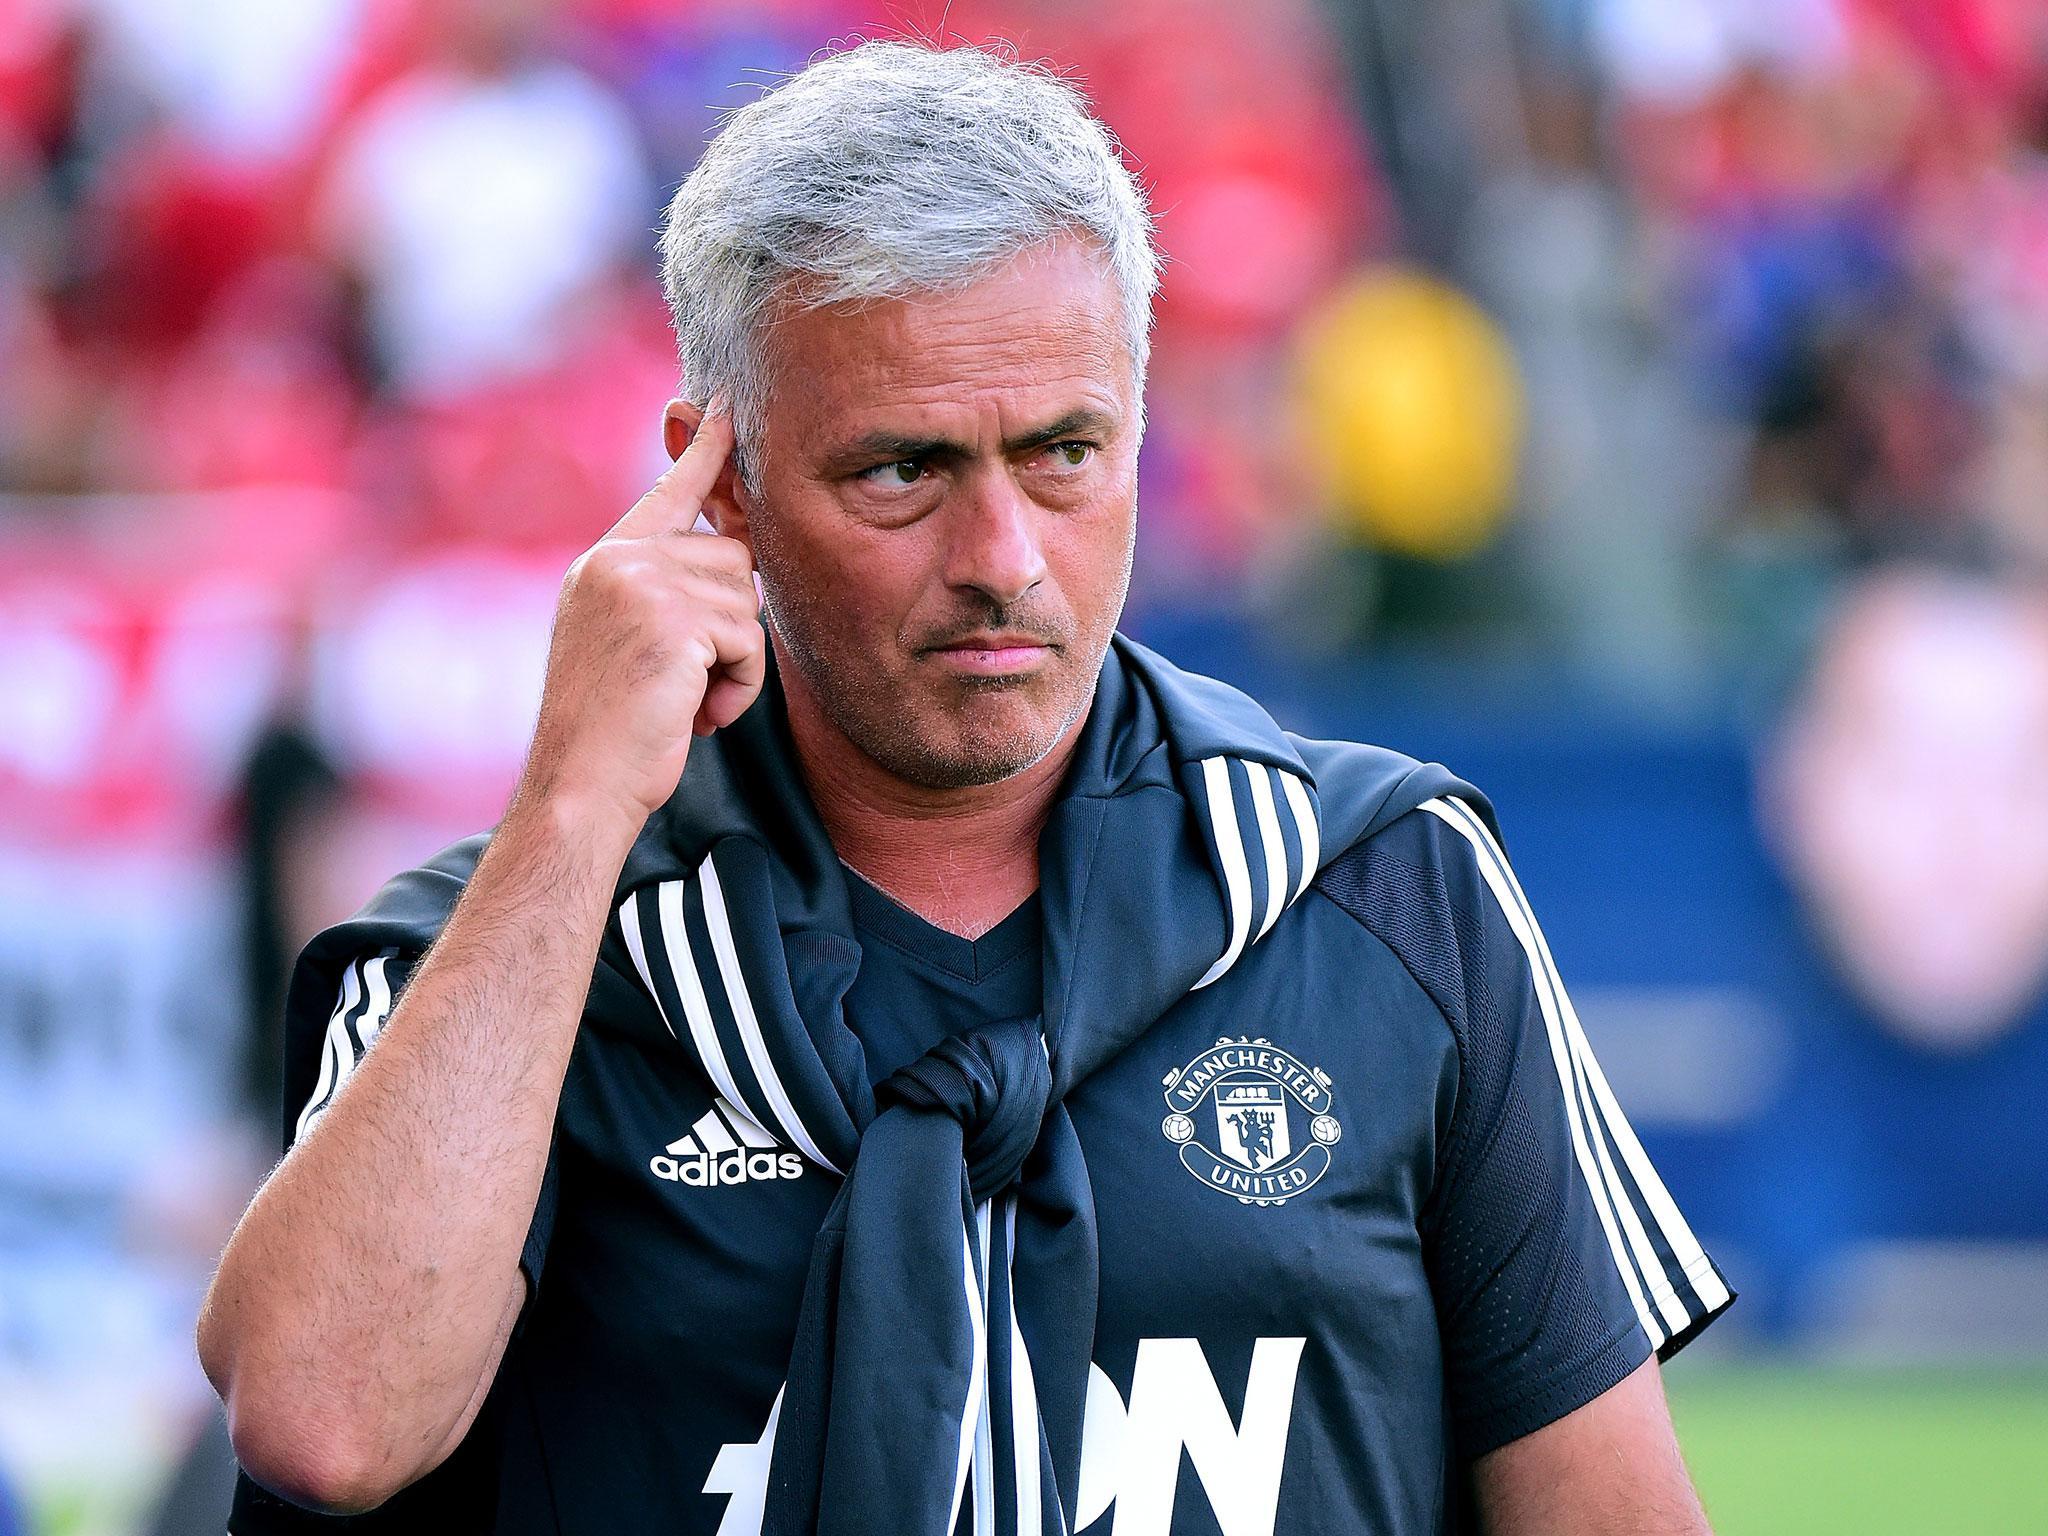 Jose Mourinho is not pleased with Manchester United's summer transfer business